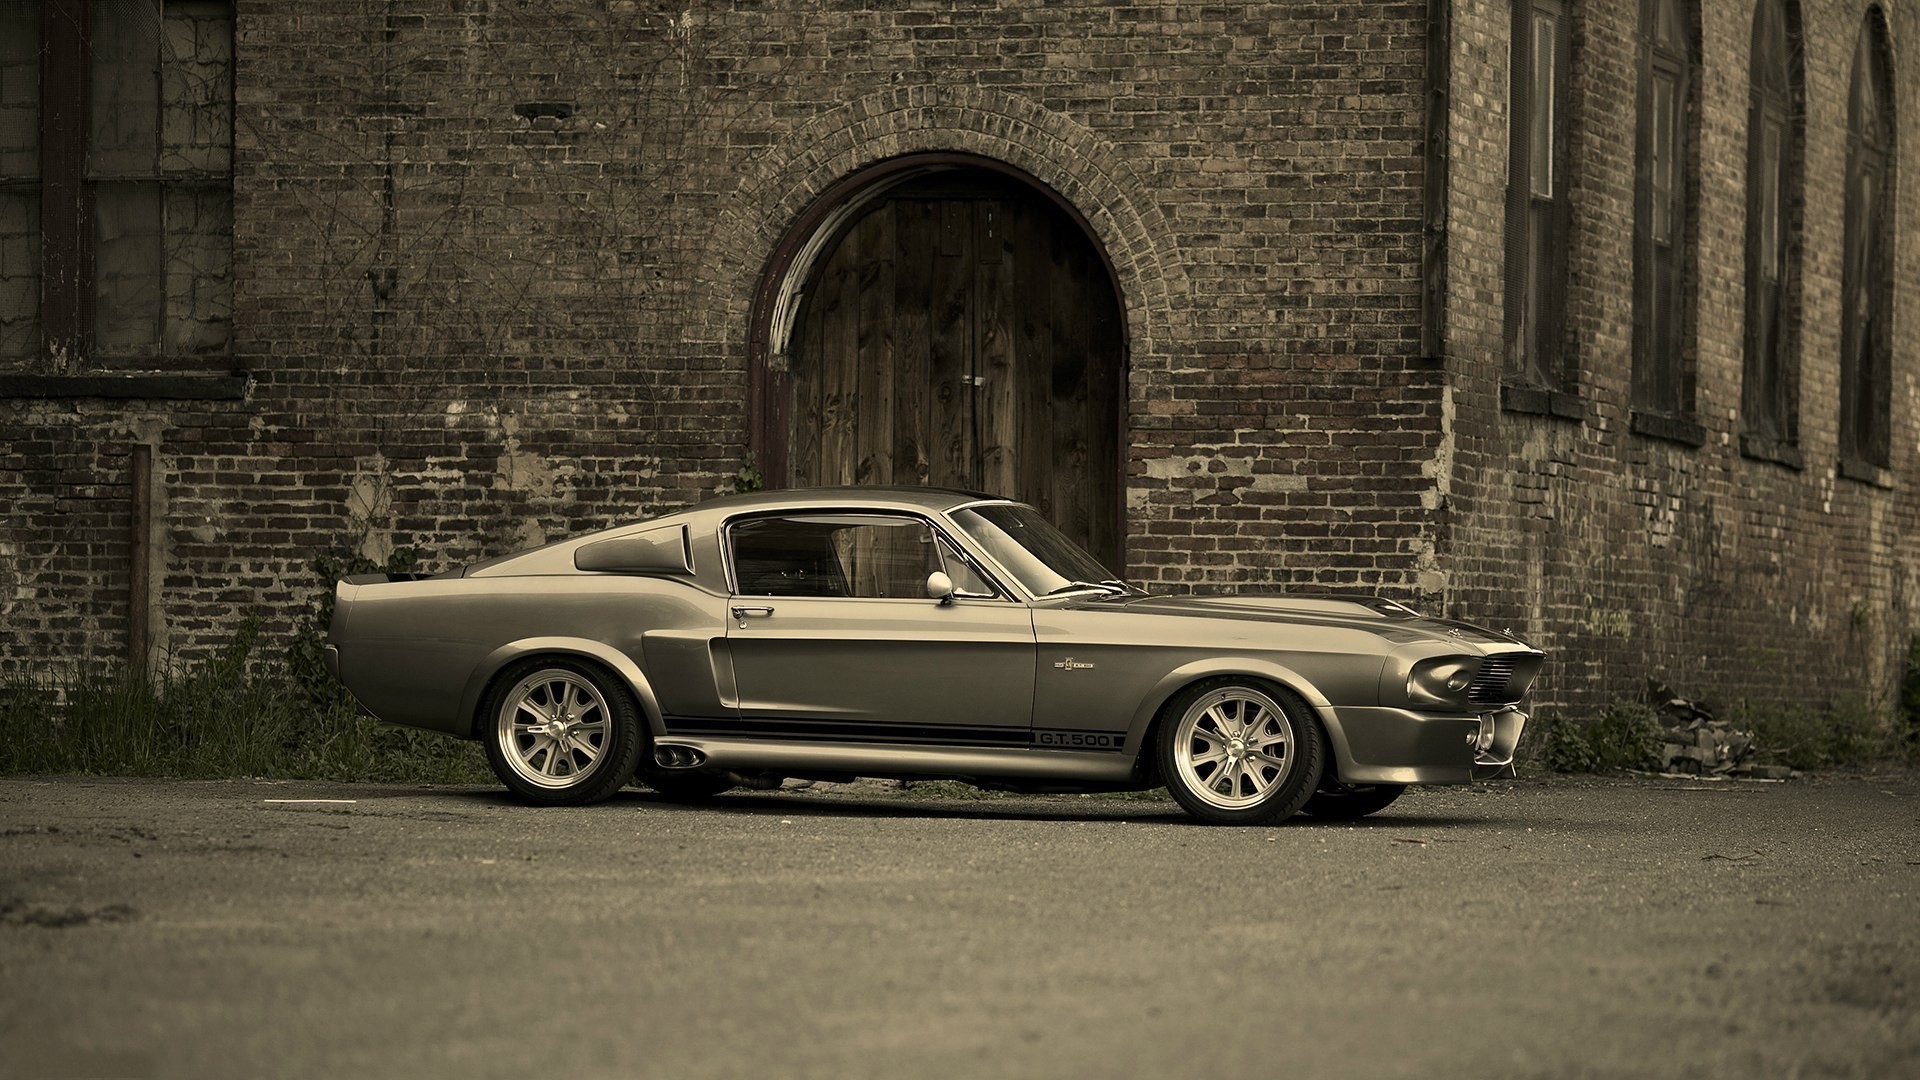 eleanor, Car, Old Car, Ford Mustang Shelby Wallpaper